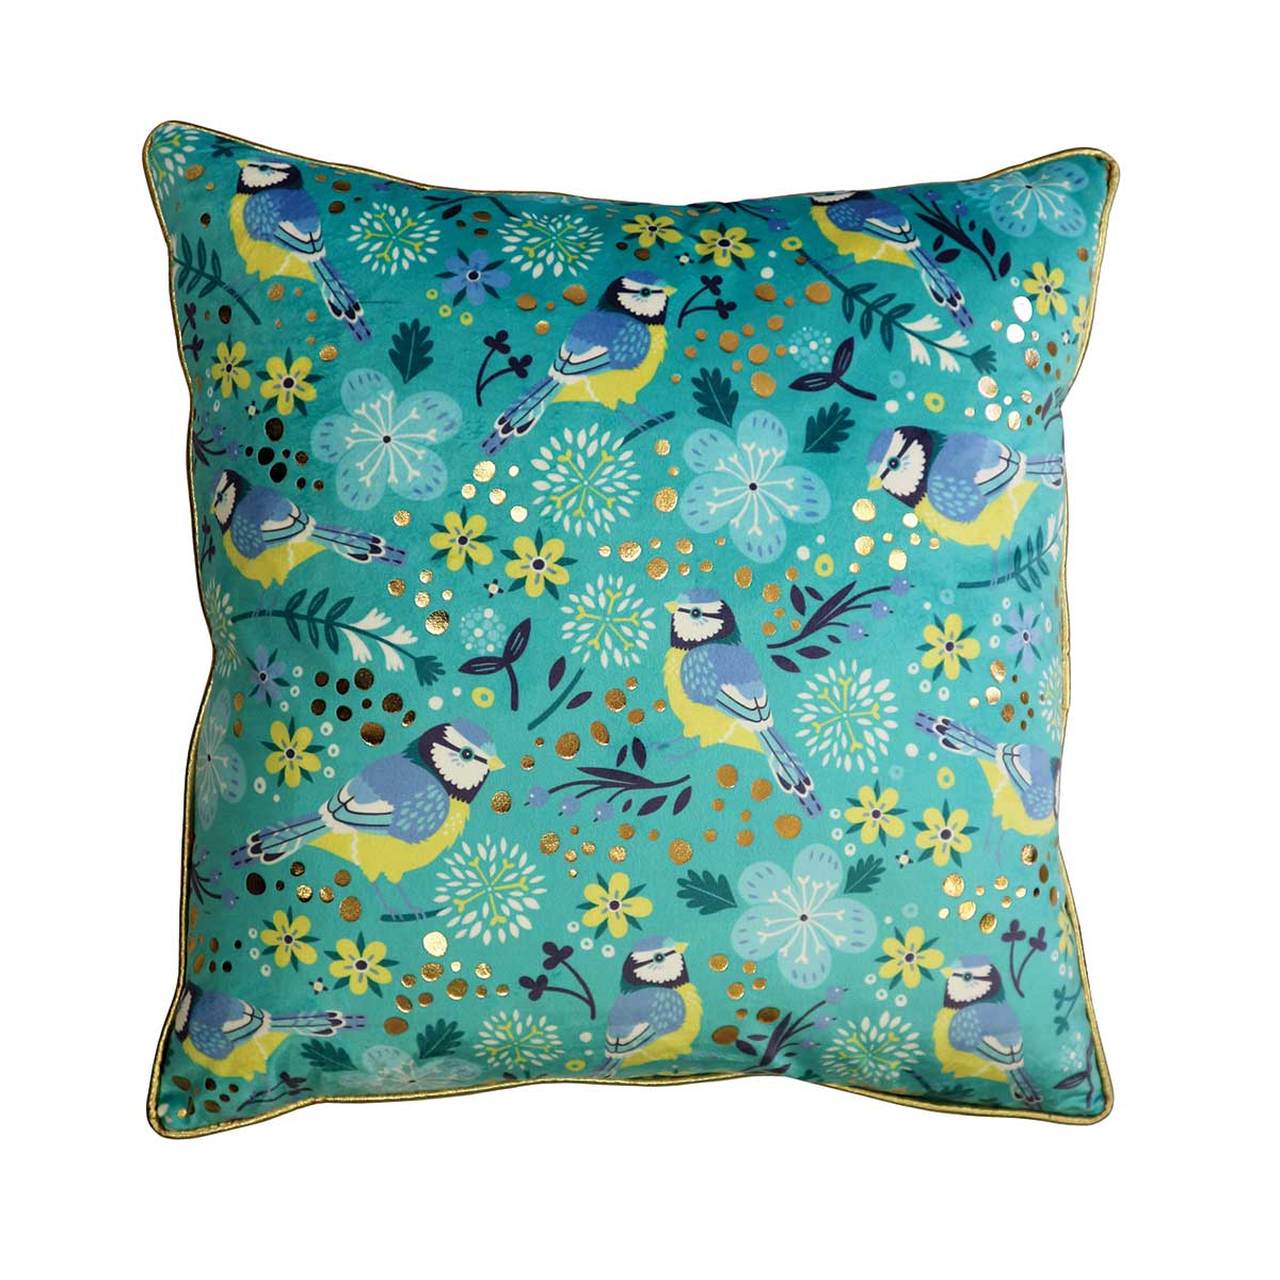 Tipperary Crystal Blue Tit Tipperary Birdy Cushion  Blue Tit Tipperary Birdy Cushion, New to the Tipperary Crystal Birdy Collection, this plush, feather filled 45cm velvet cushion features the exquisite Blue Tit illustration and will make a bright and colourful statement in any home.